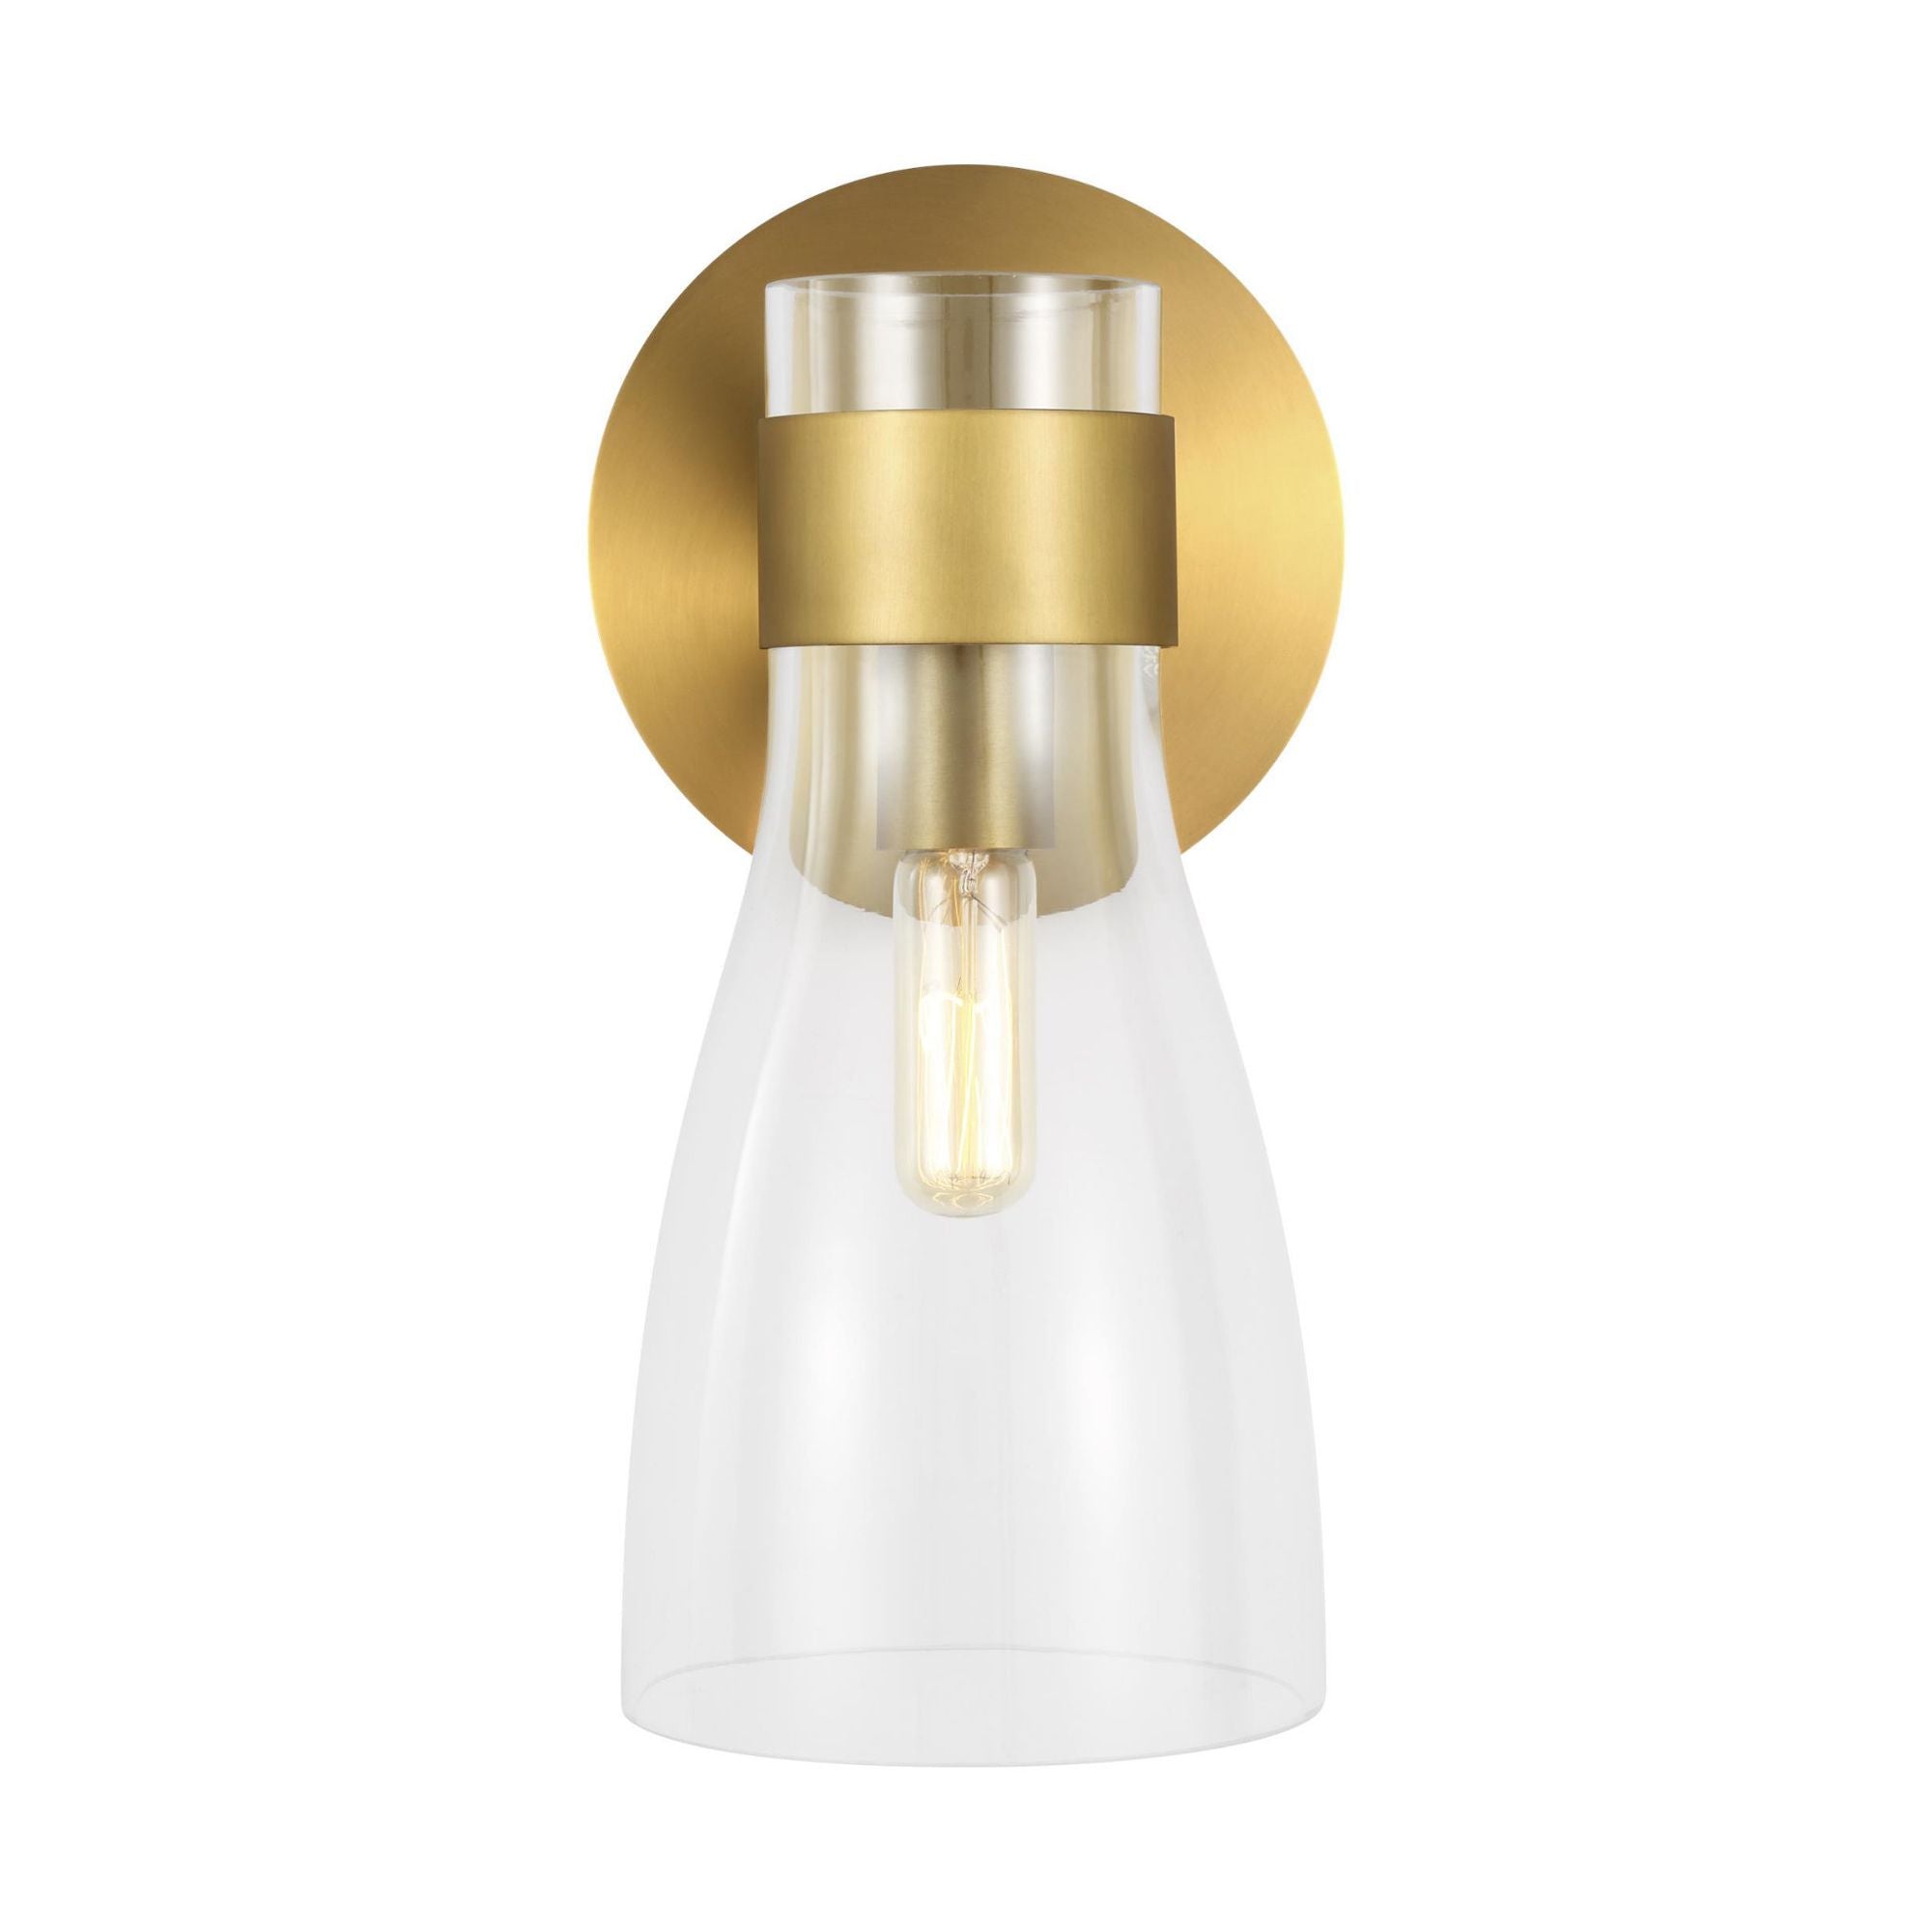 AERIN Moritz One Light Sconce in Burnished Brass